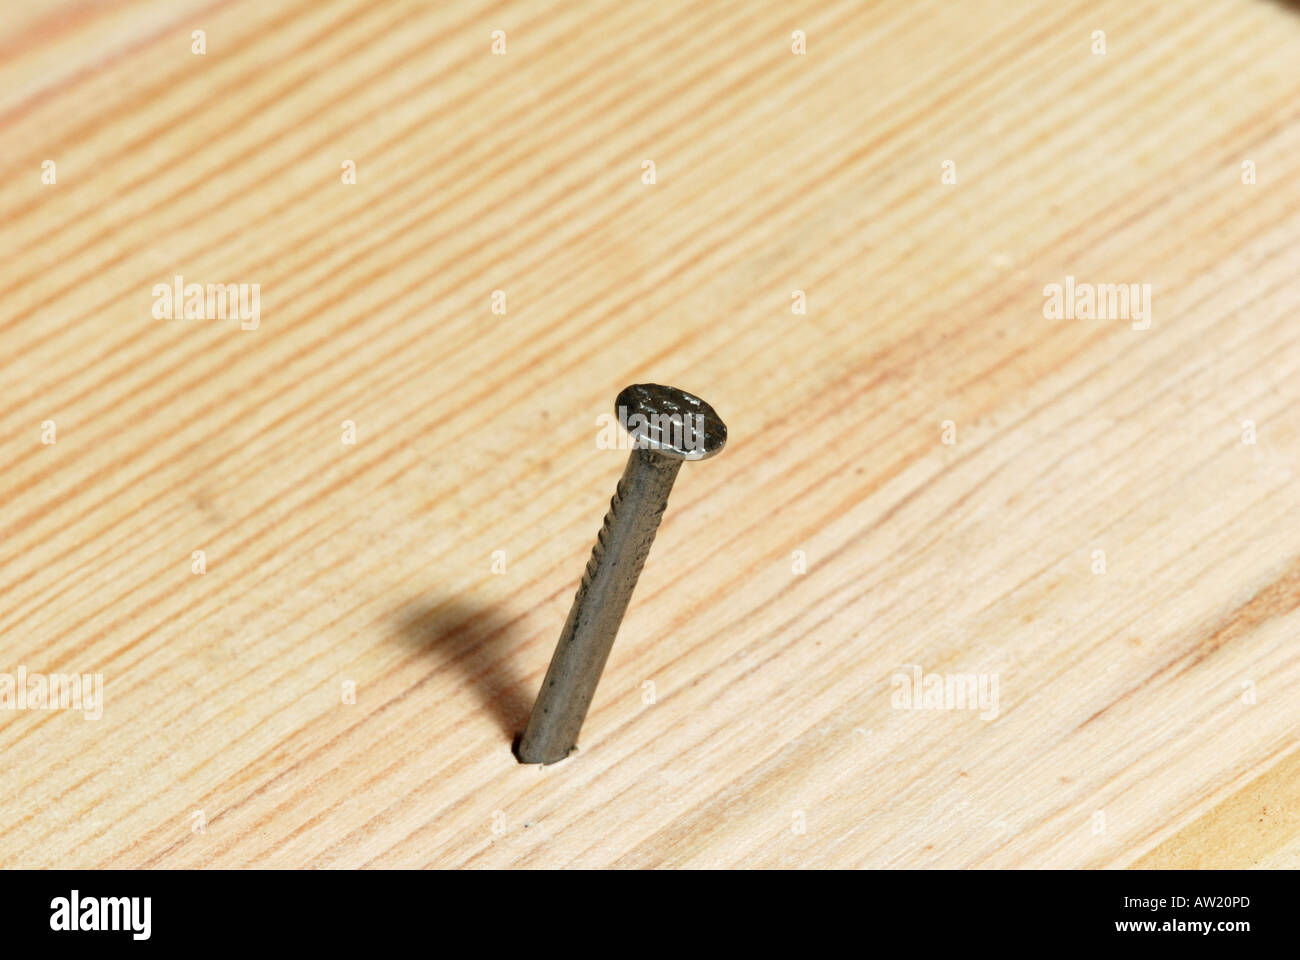 Hammer Hitting a Nail into a Wood Stock Image - Image of construction,  concept: 38302553